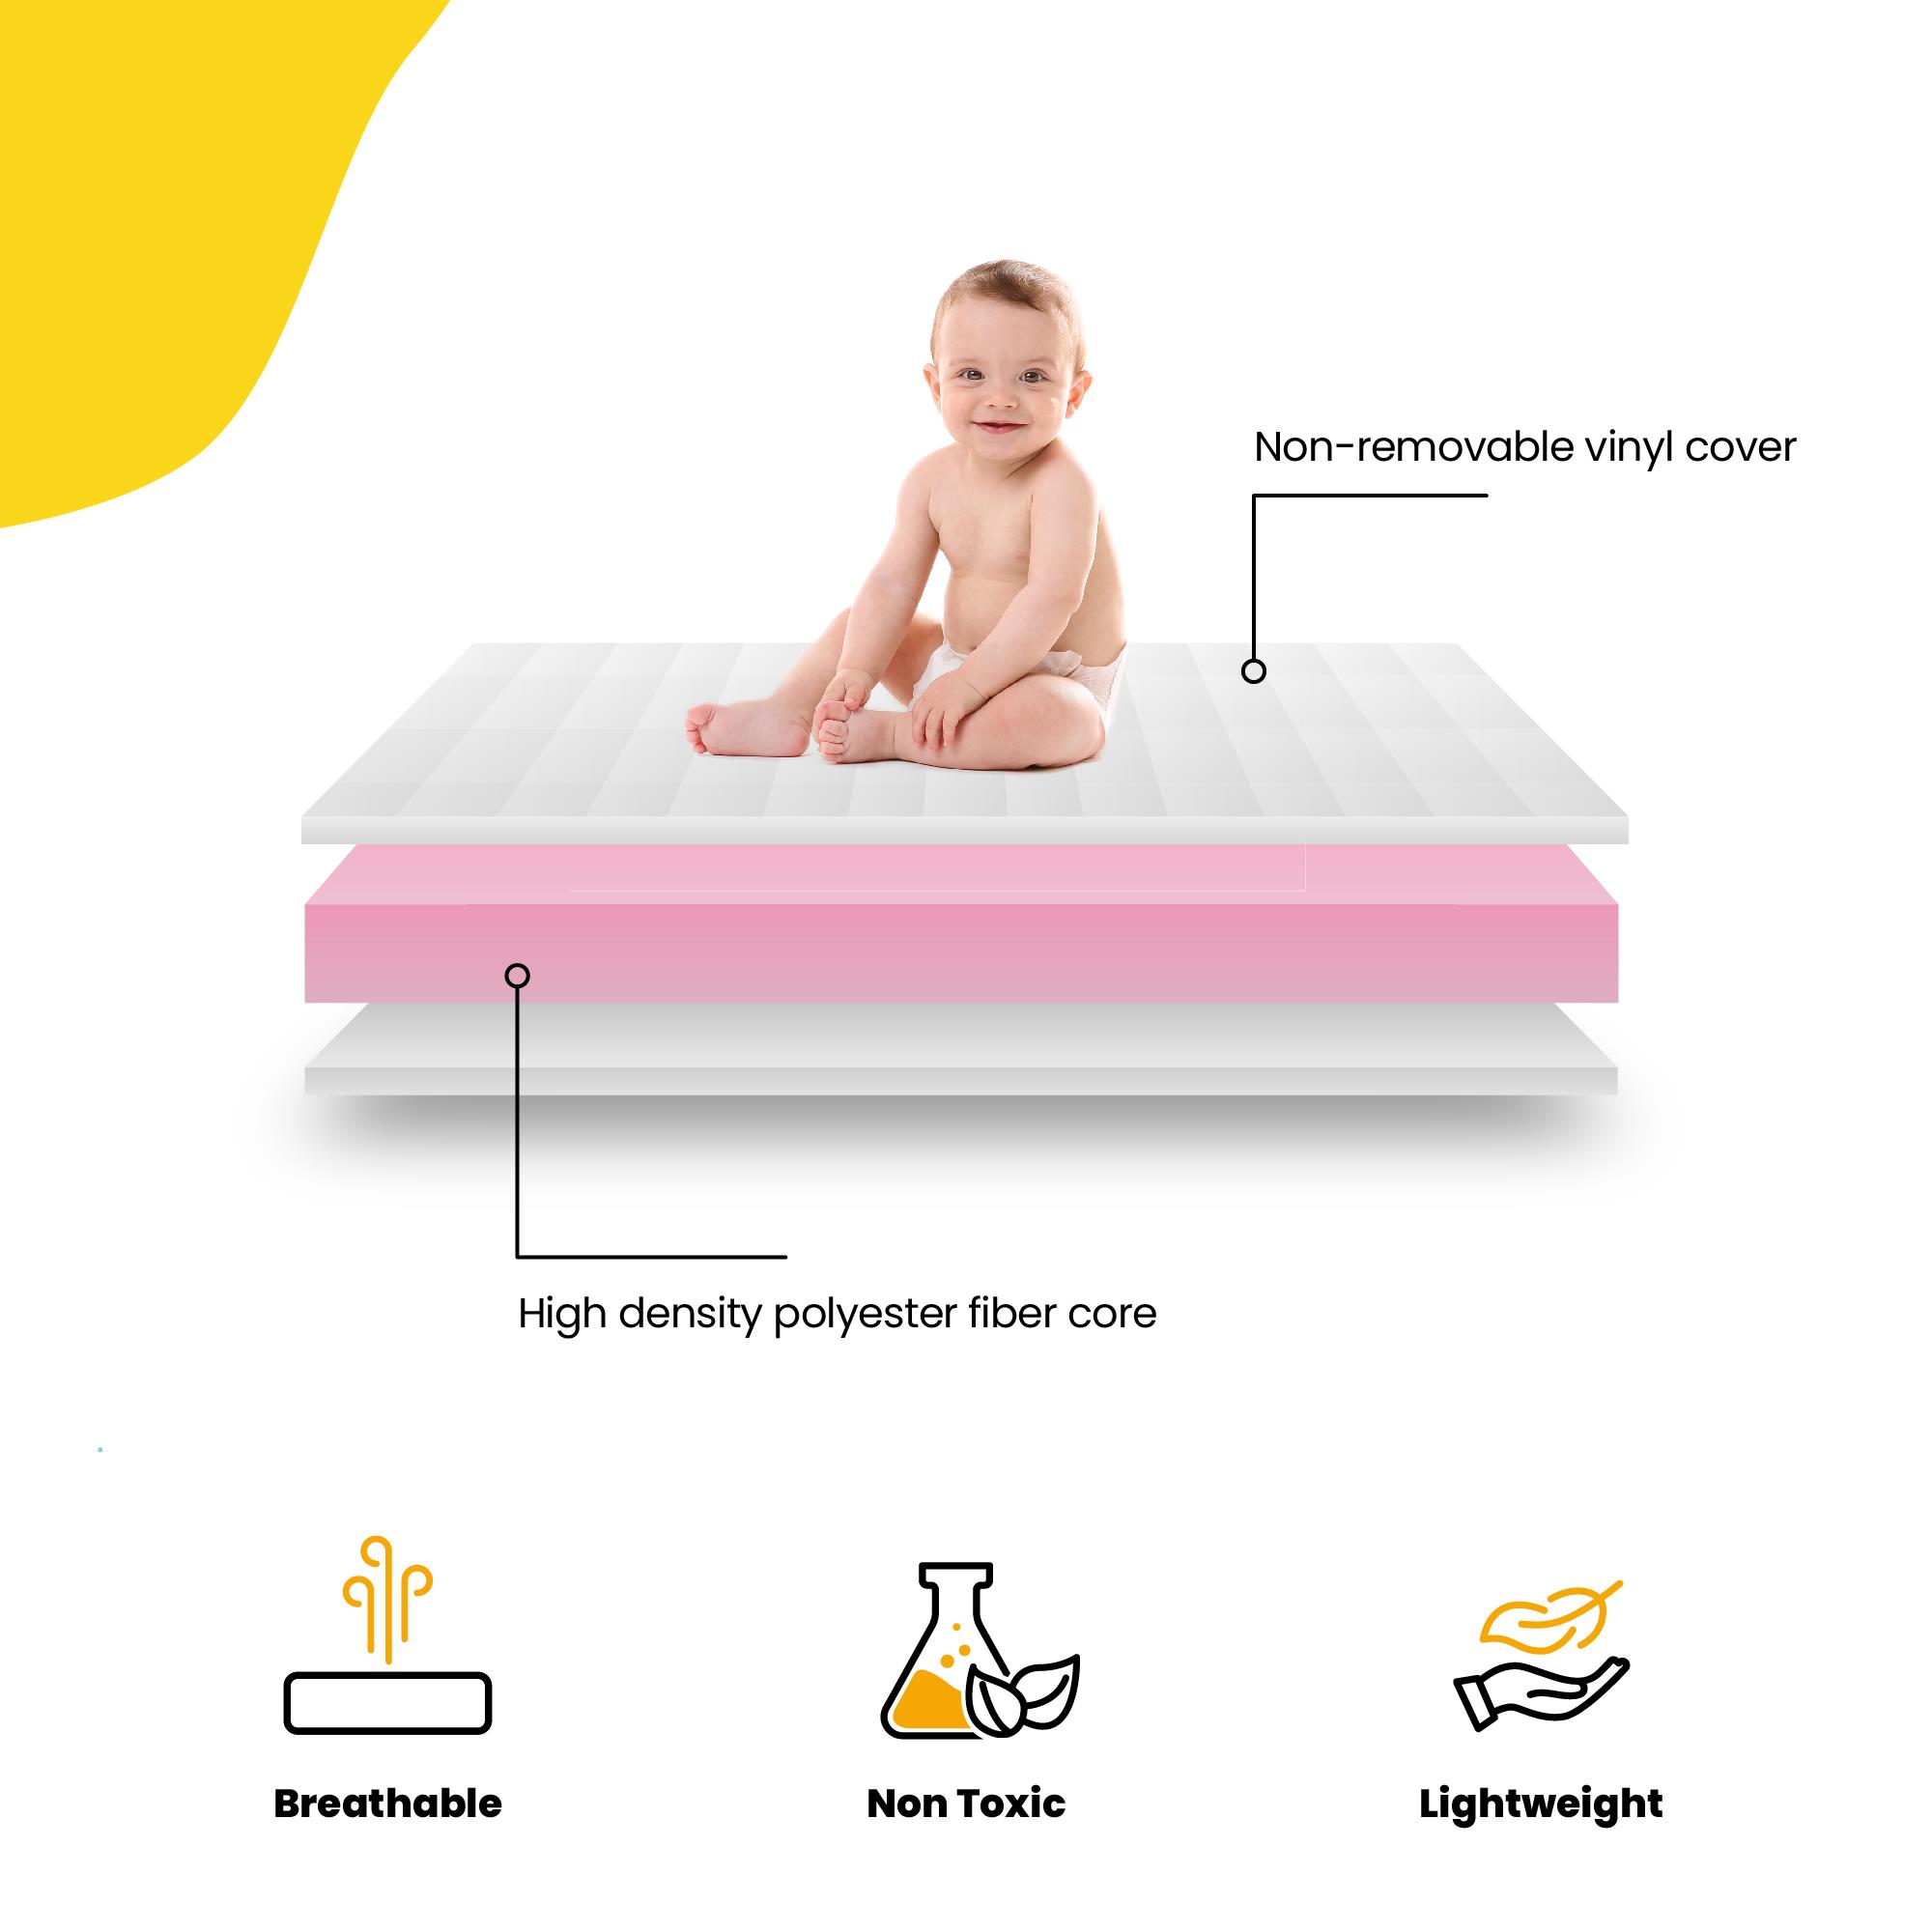 Safety 1st Sweet Dreams 5" Crib & Toddler Mattress with Waterproof Cover| Greenguard Gold Certified - image 4 of 12